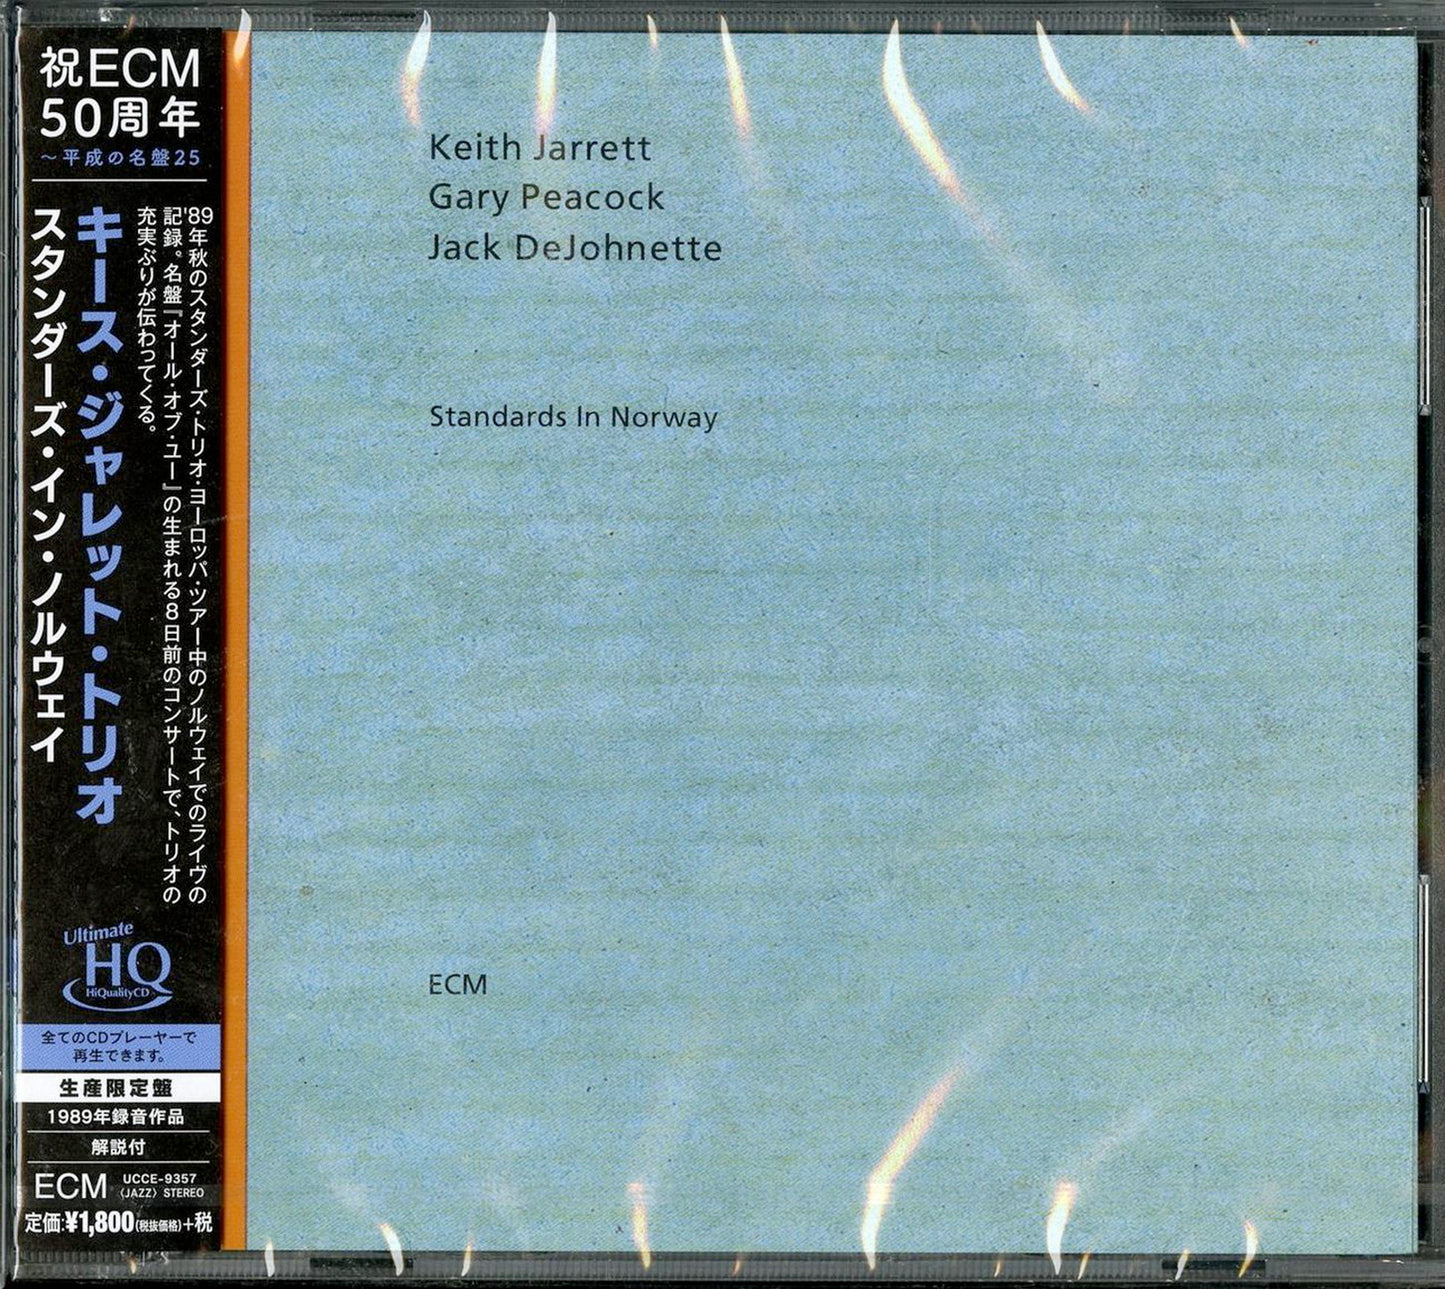 Keith Jarrett Trio - Standards In Norway - UHQCD Limited Edition